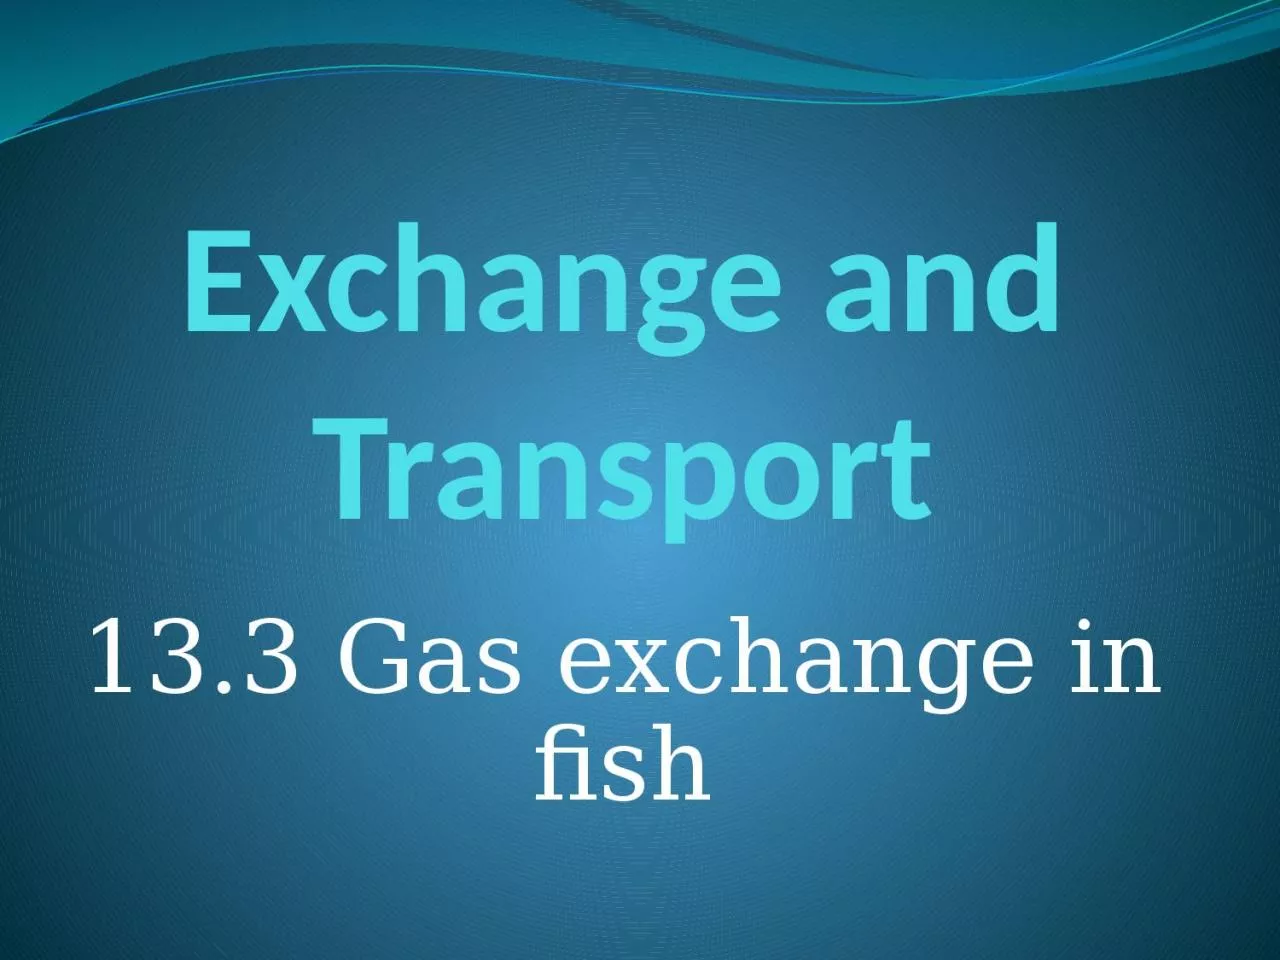 Exchange and Transport 13.3 Gas exchange in fish